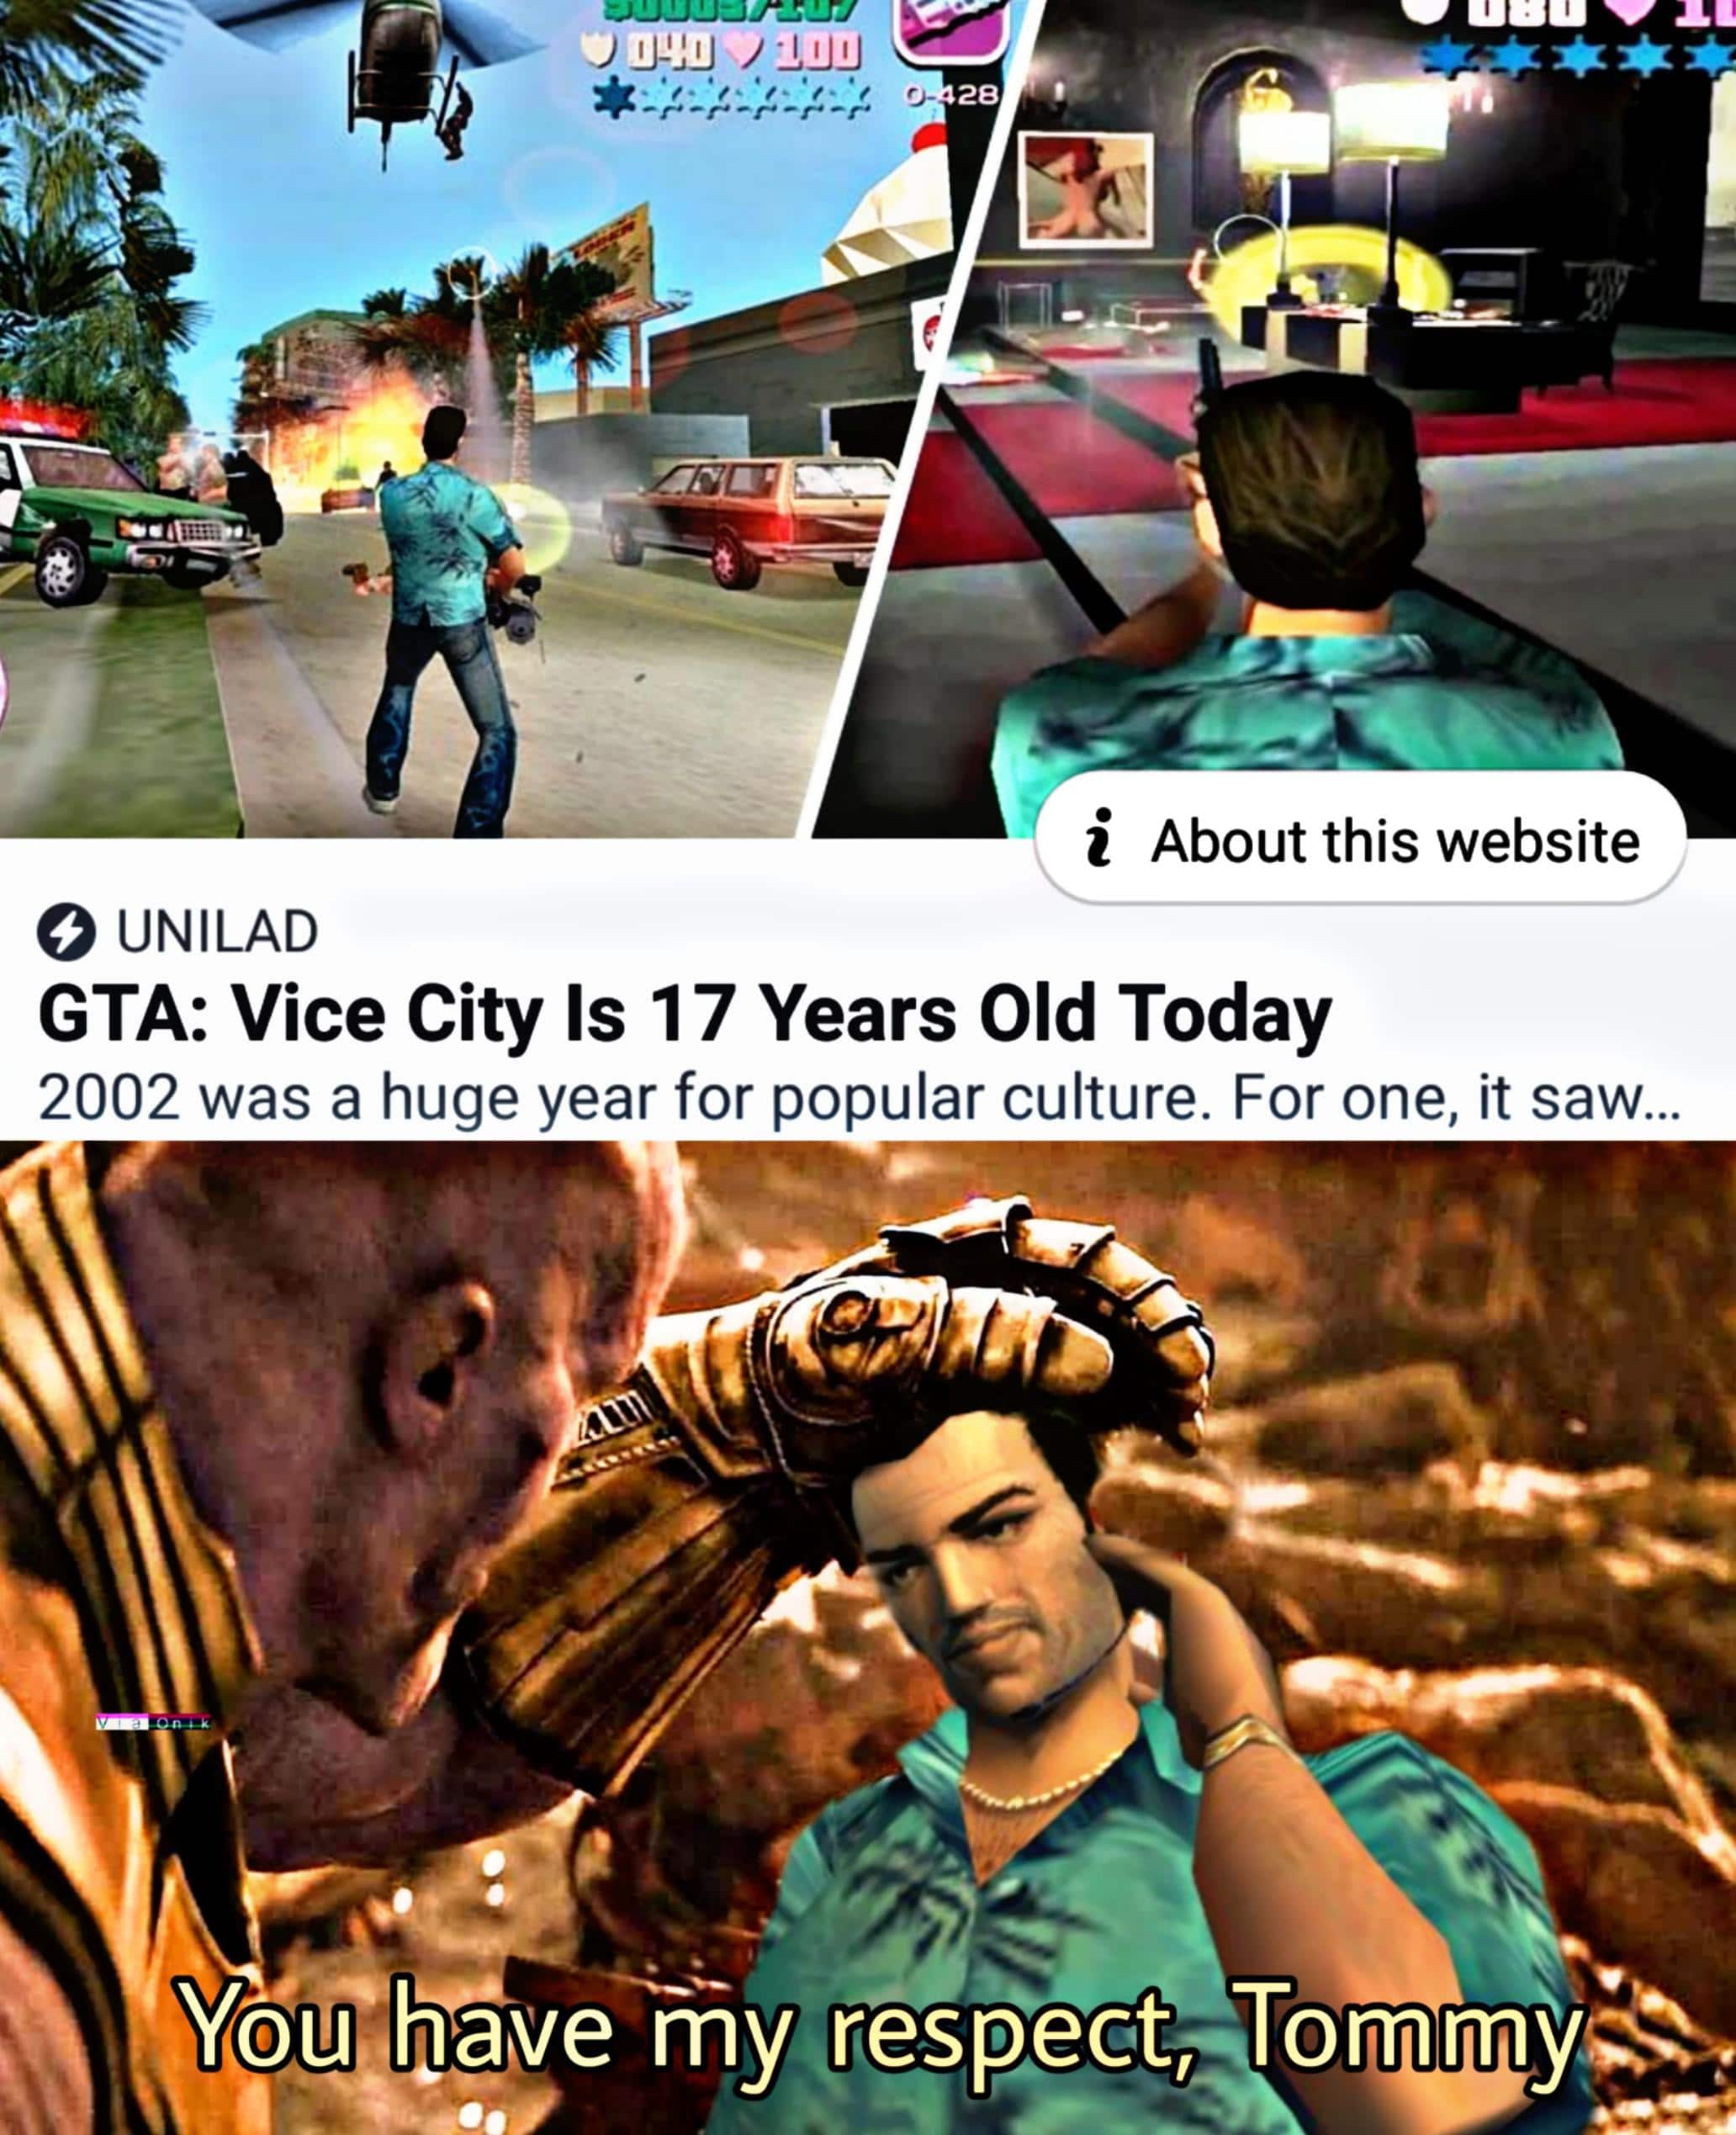 thanos avengers-memes thanos text: 2B i About this website O UNILAD GTA: Vice City Is 17 Years Old Today 2002 was a huge year for popular culture. For one, it saw... you have myxrespect, Tommy•.s. 